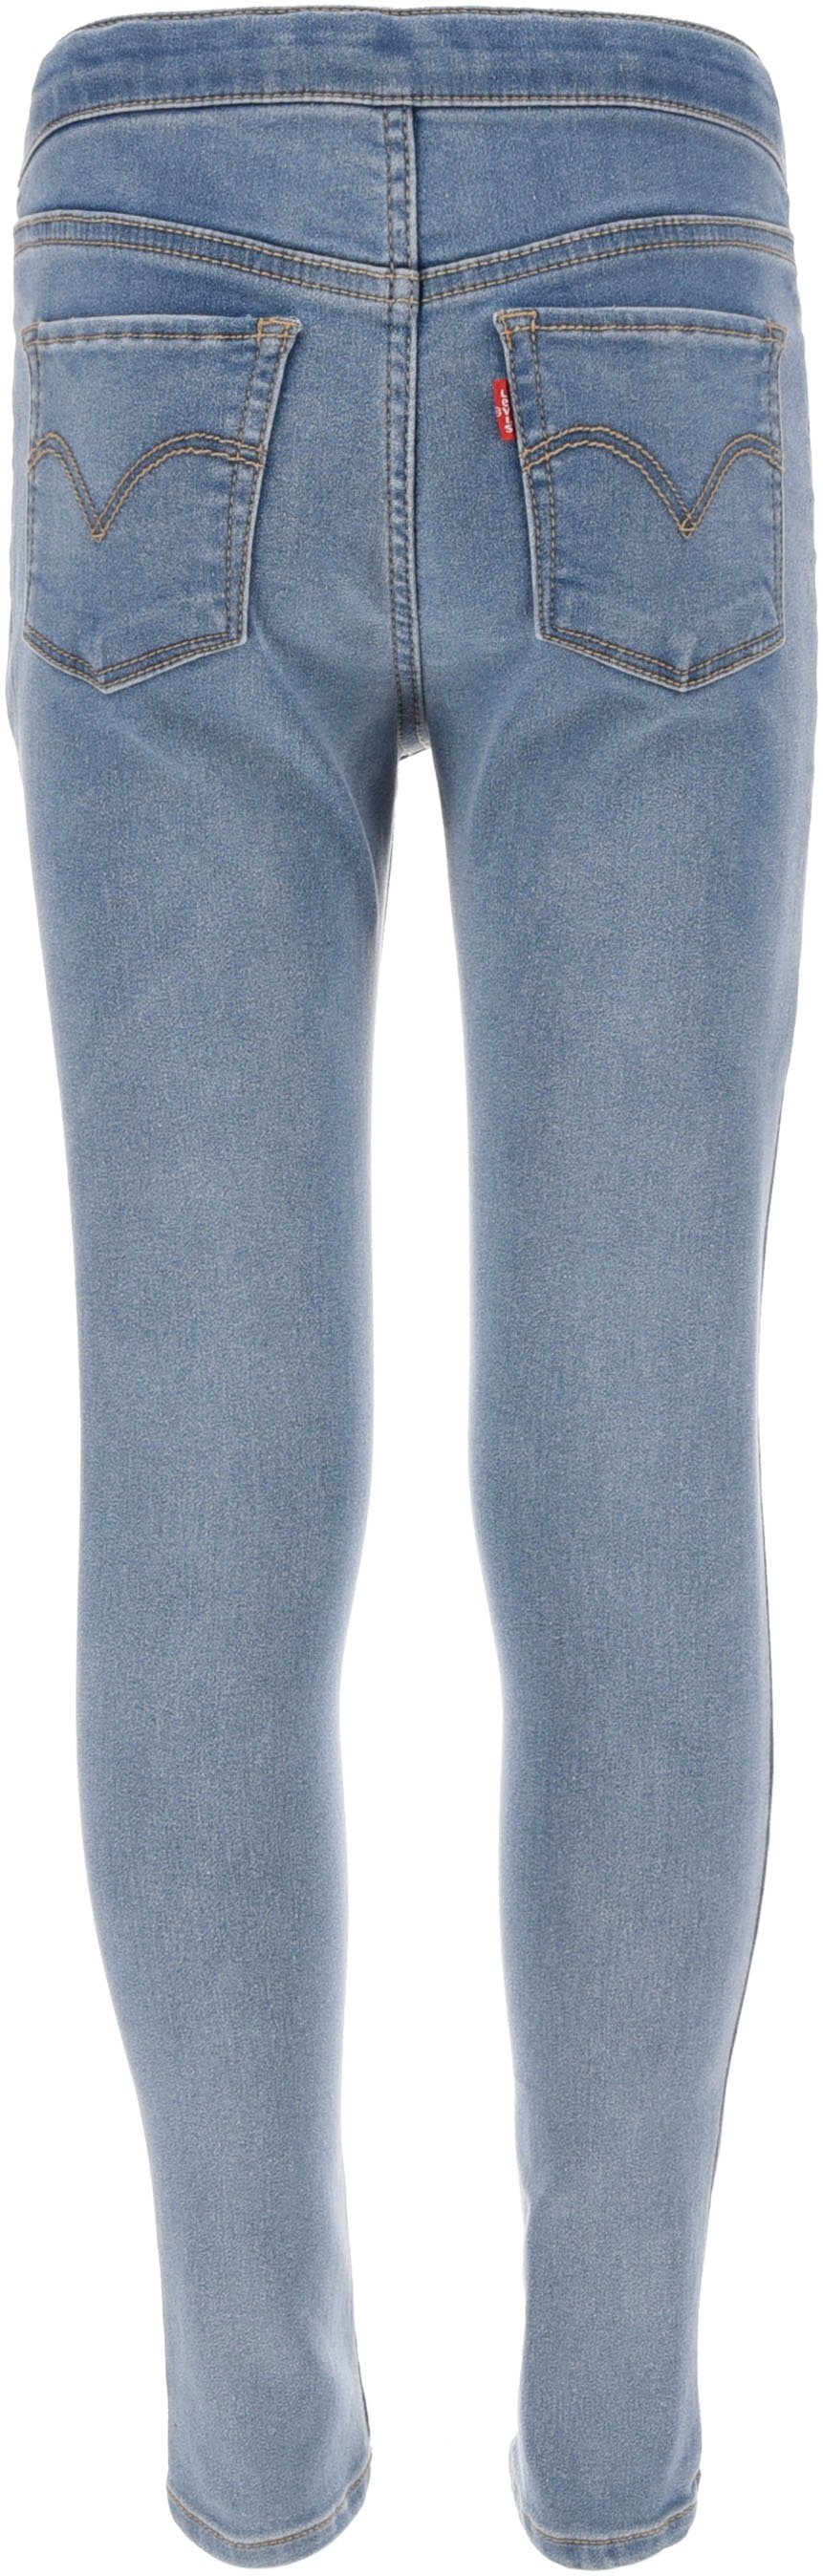 Kids Jeansjeggings GIRLS PULL-ON vices Levi's® LEGGINGS for miami